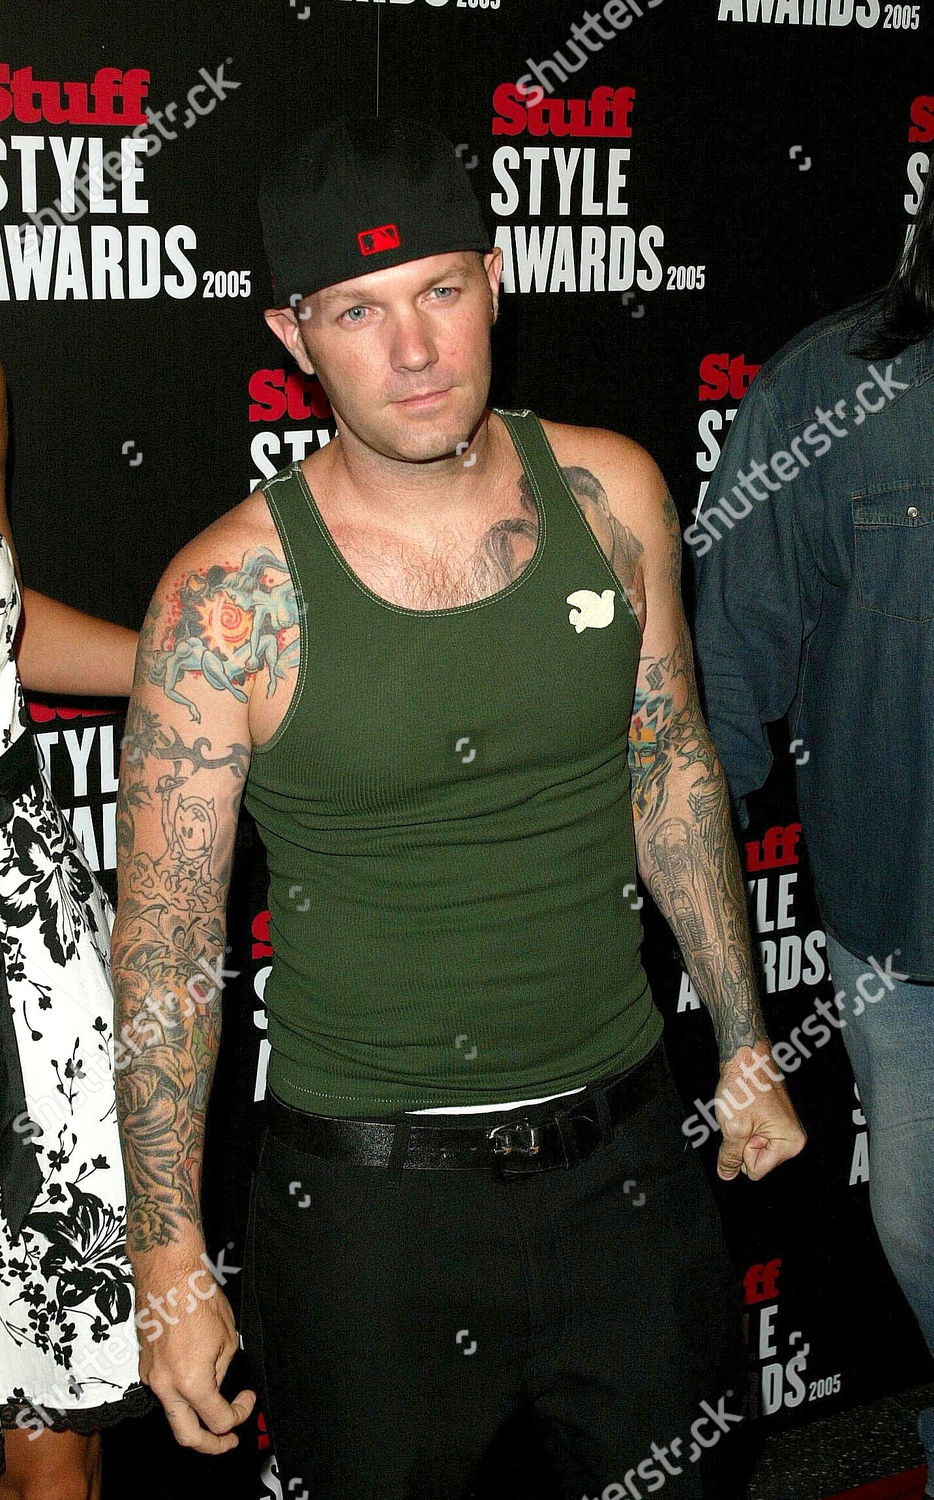 Vocalist Fred Durst of the nu metal band Limp Bizkit is shown performing on  stage during a live concert appearance Stock Photo  Alamy